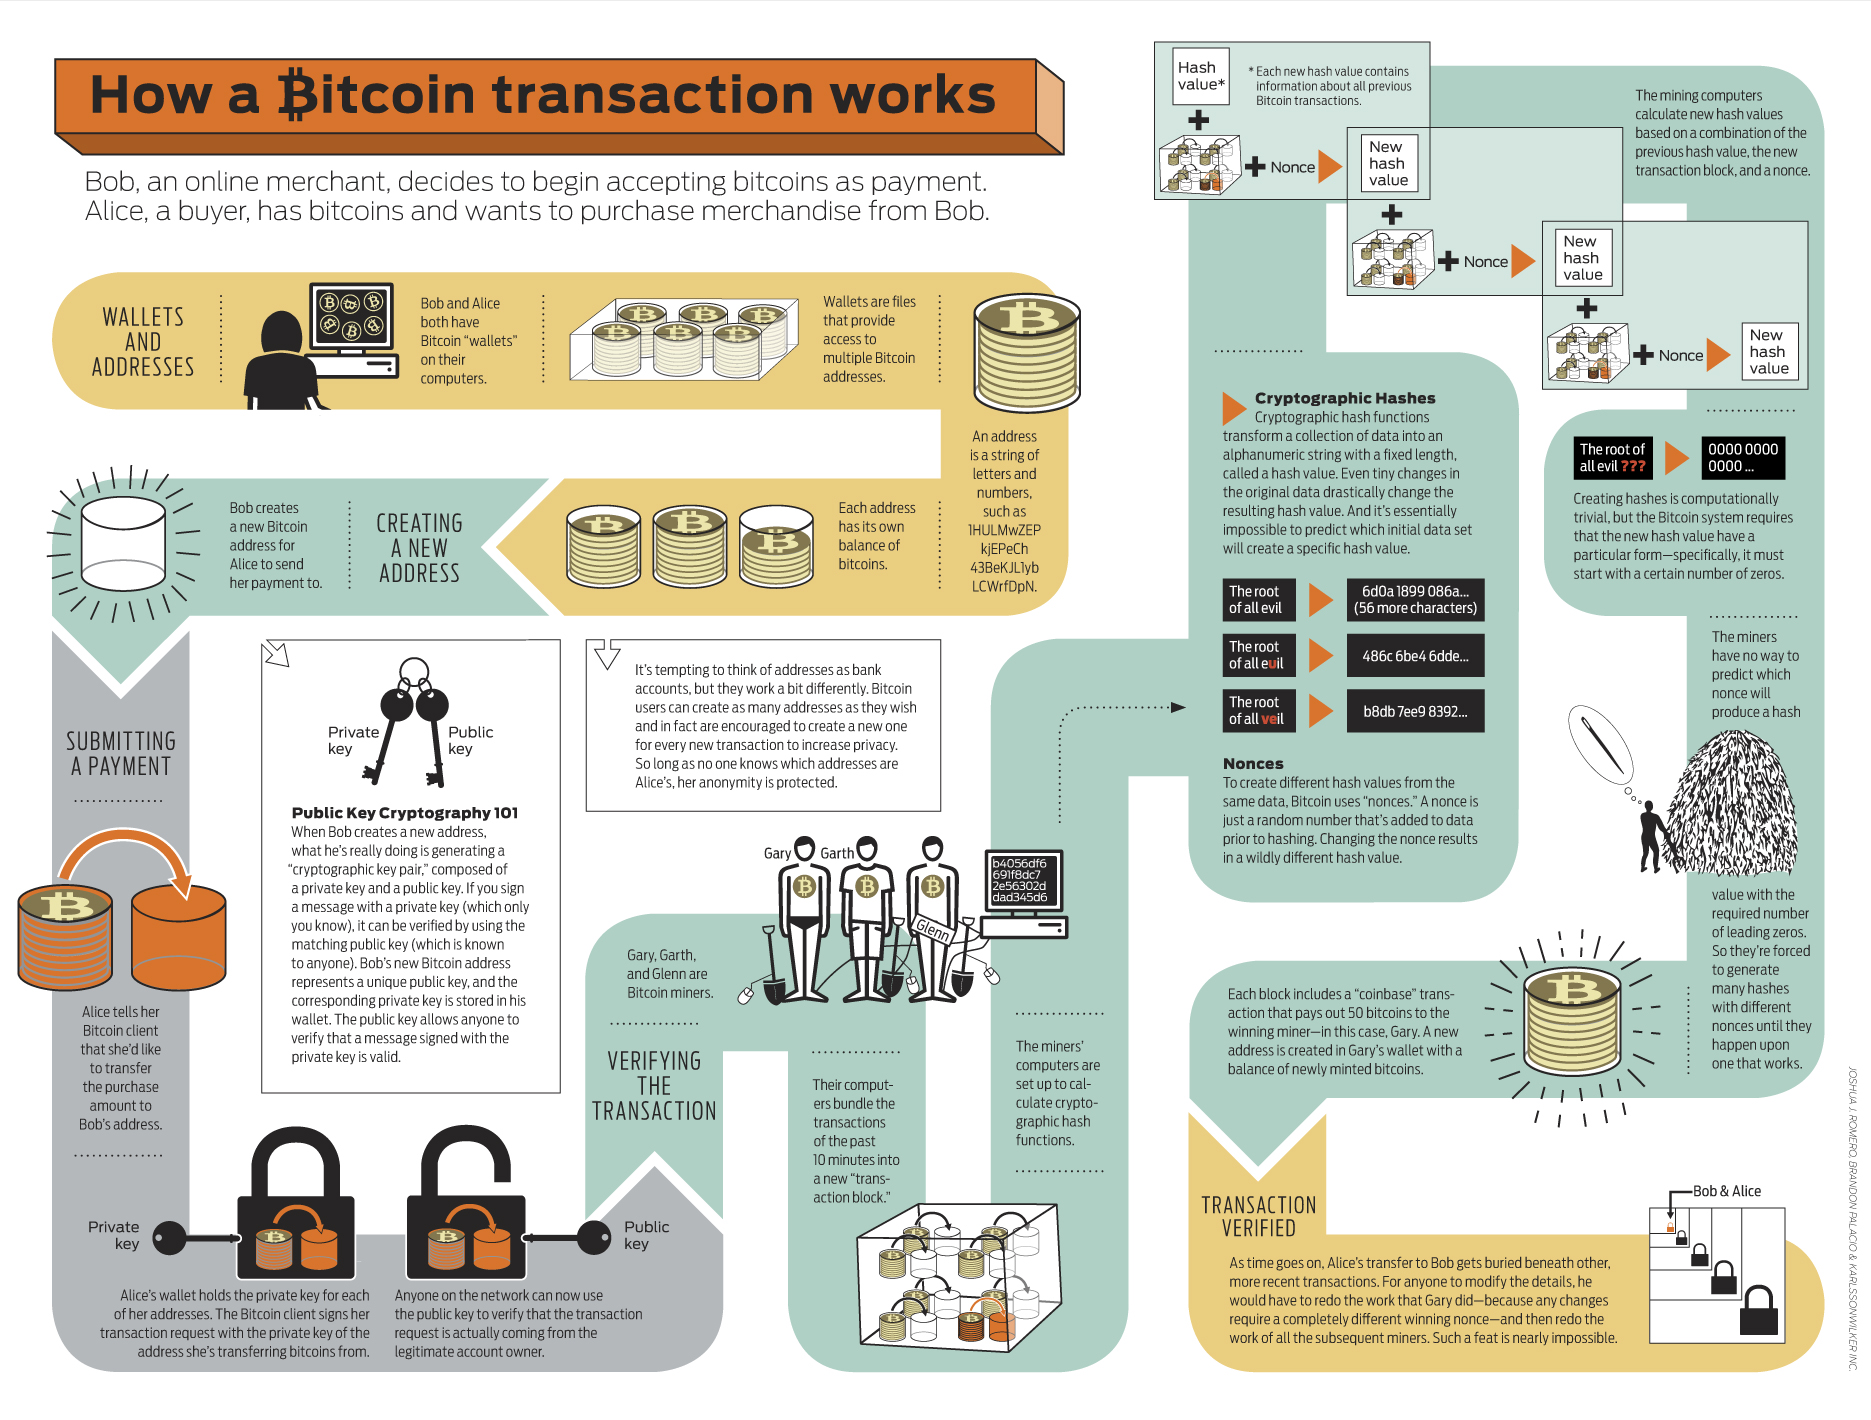 Workflow of Bitcoin